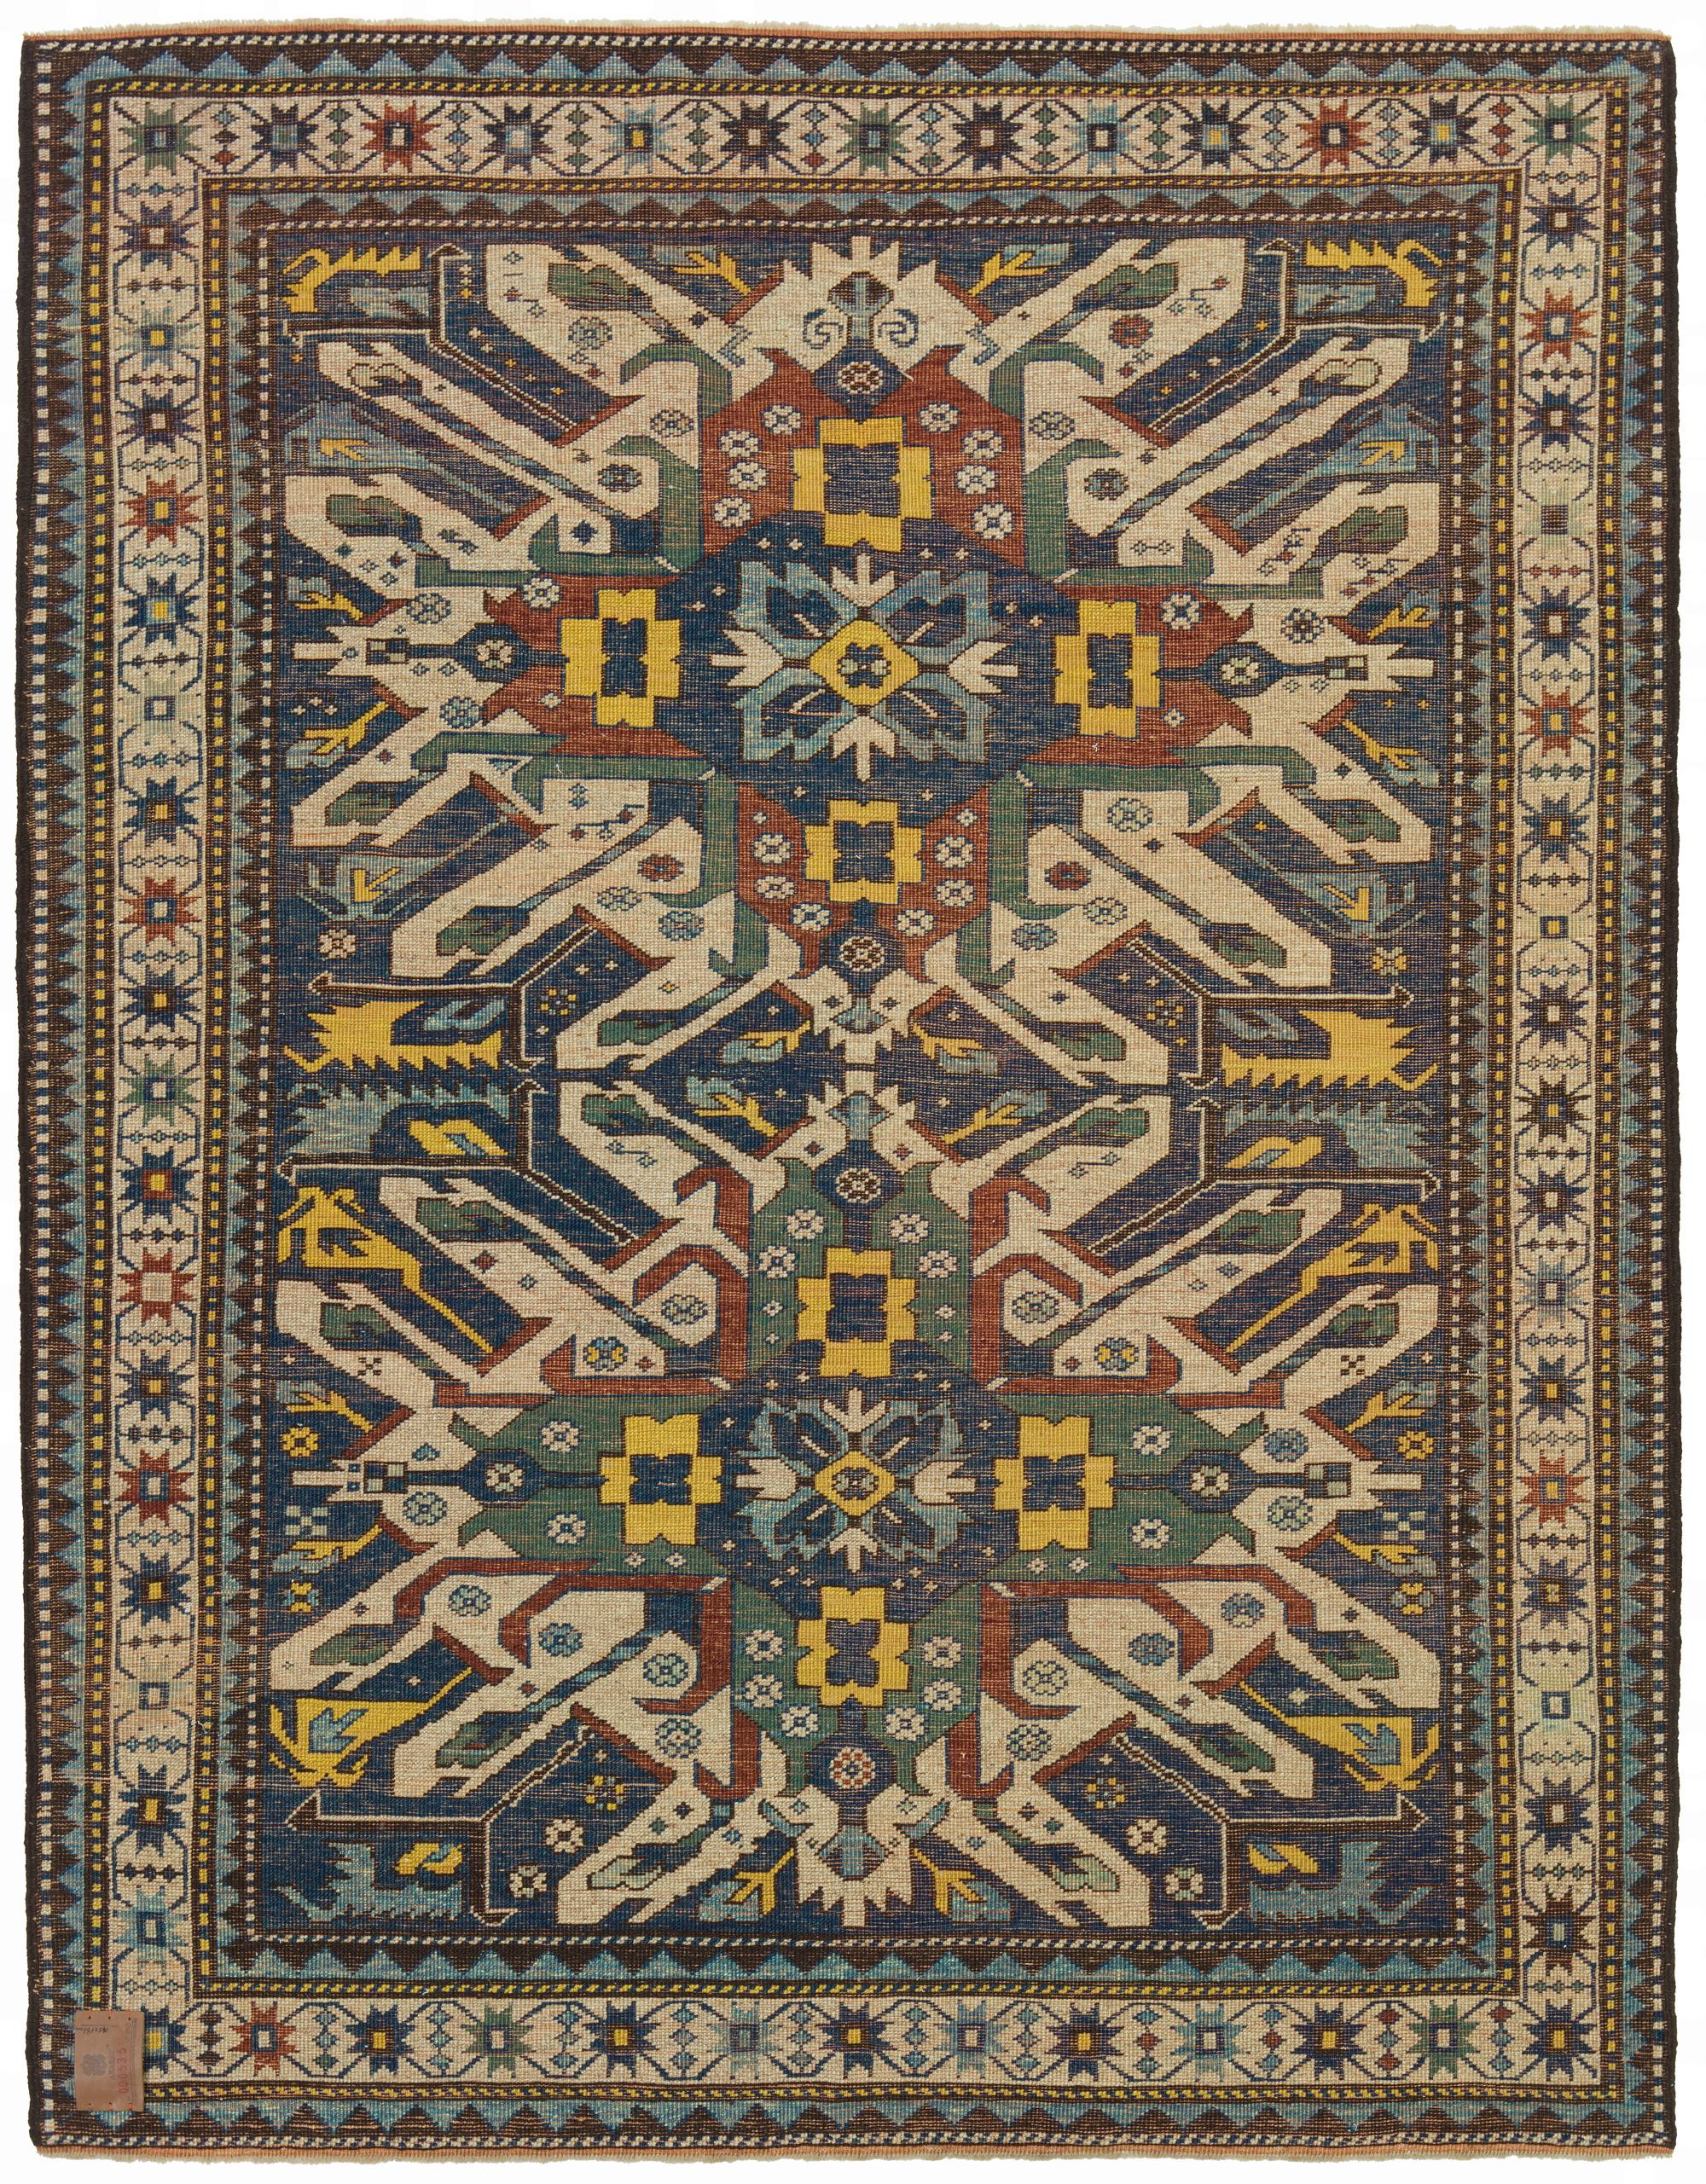 The design source of the rug comes from the book Tapis du Caucase – Rugs of the Caucasus, Ian Bennett & Aziz Bassoul, The Nicholas Sursock Museum, Beirut, Lebanon 2003, nr.29 and Oriental Rugs Volume 1 Caucasian, Ian Bennett, Oriental Textile Press,